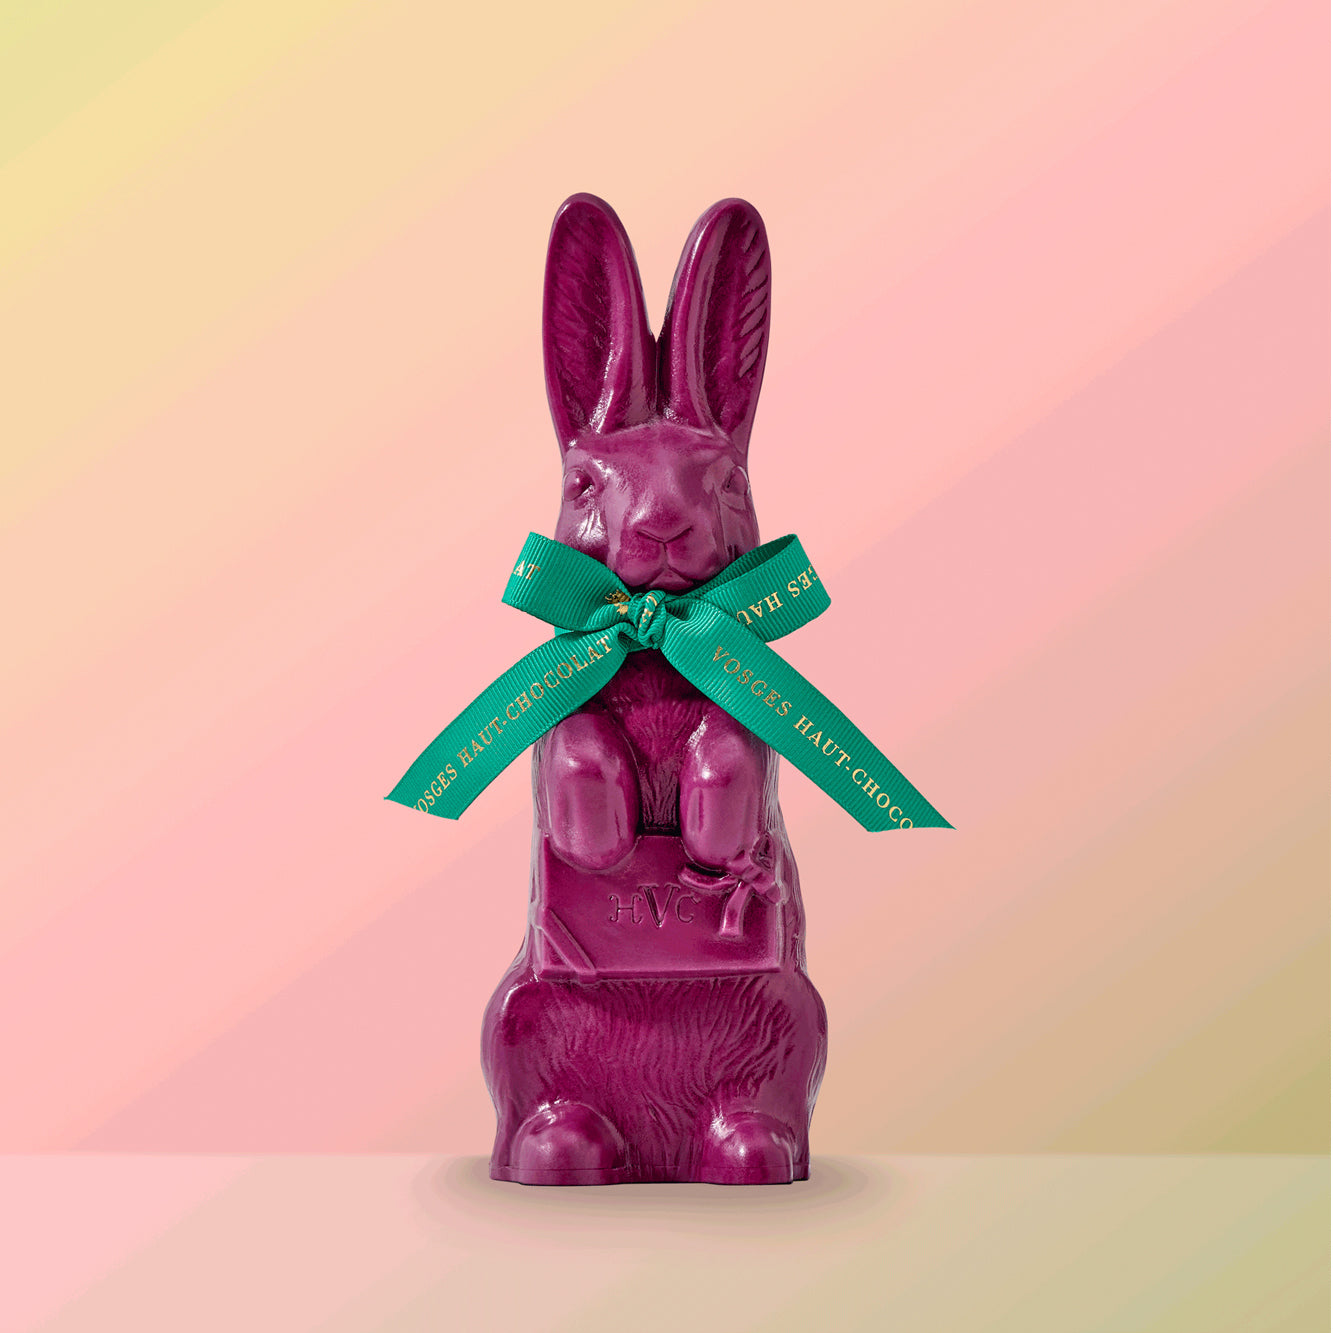 A large, purple chocolate rabbit wearing a turquoise and gold ribbon bow stands upright on a soft, pink background.